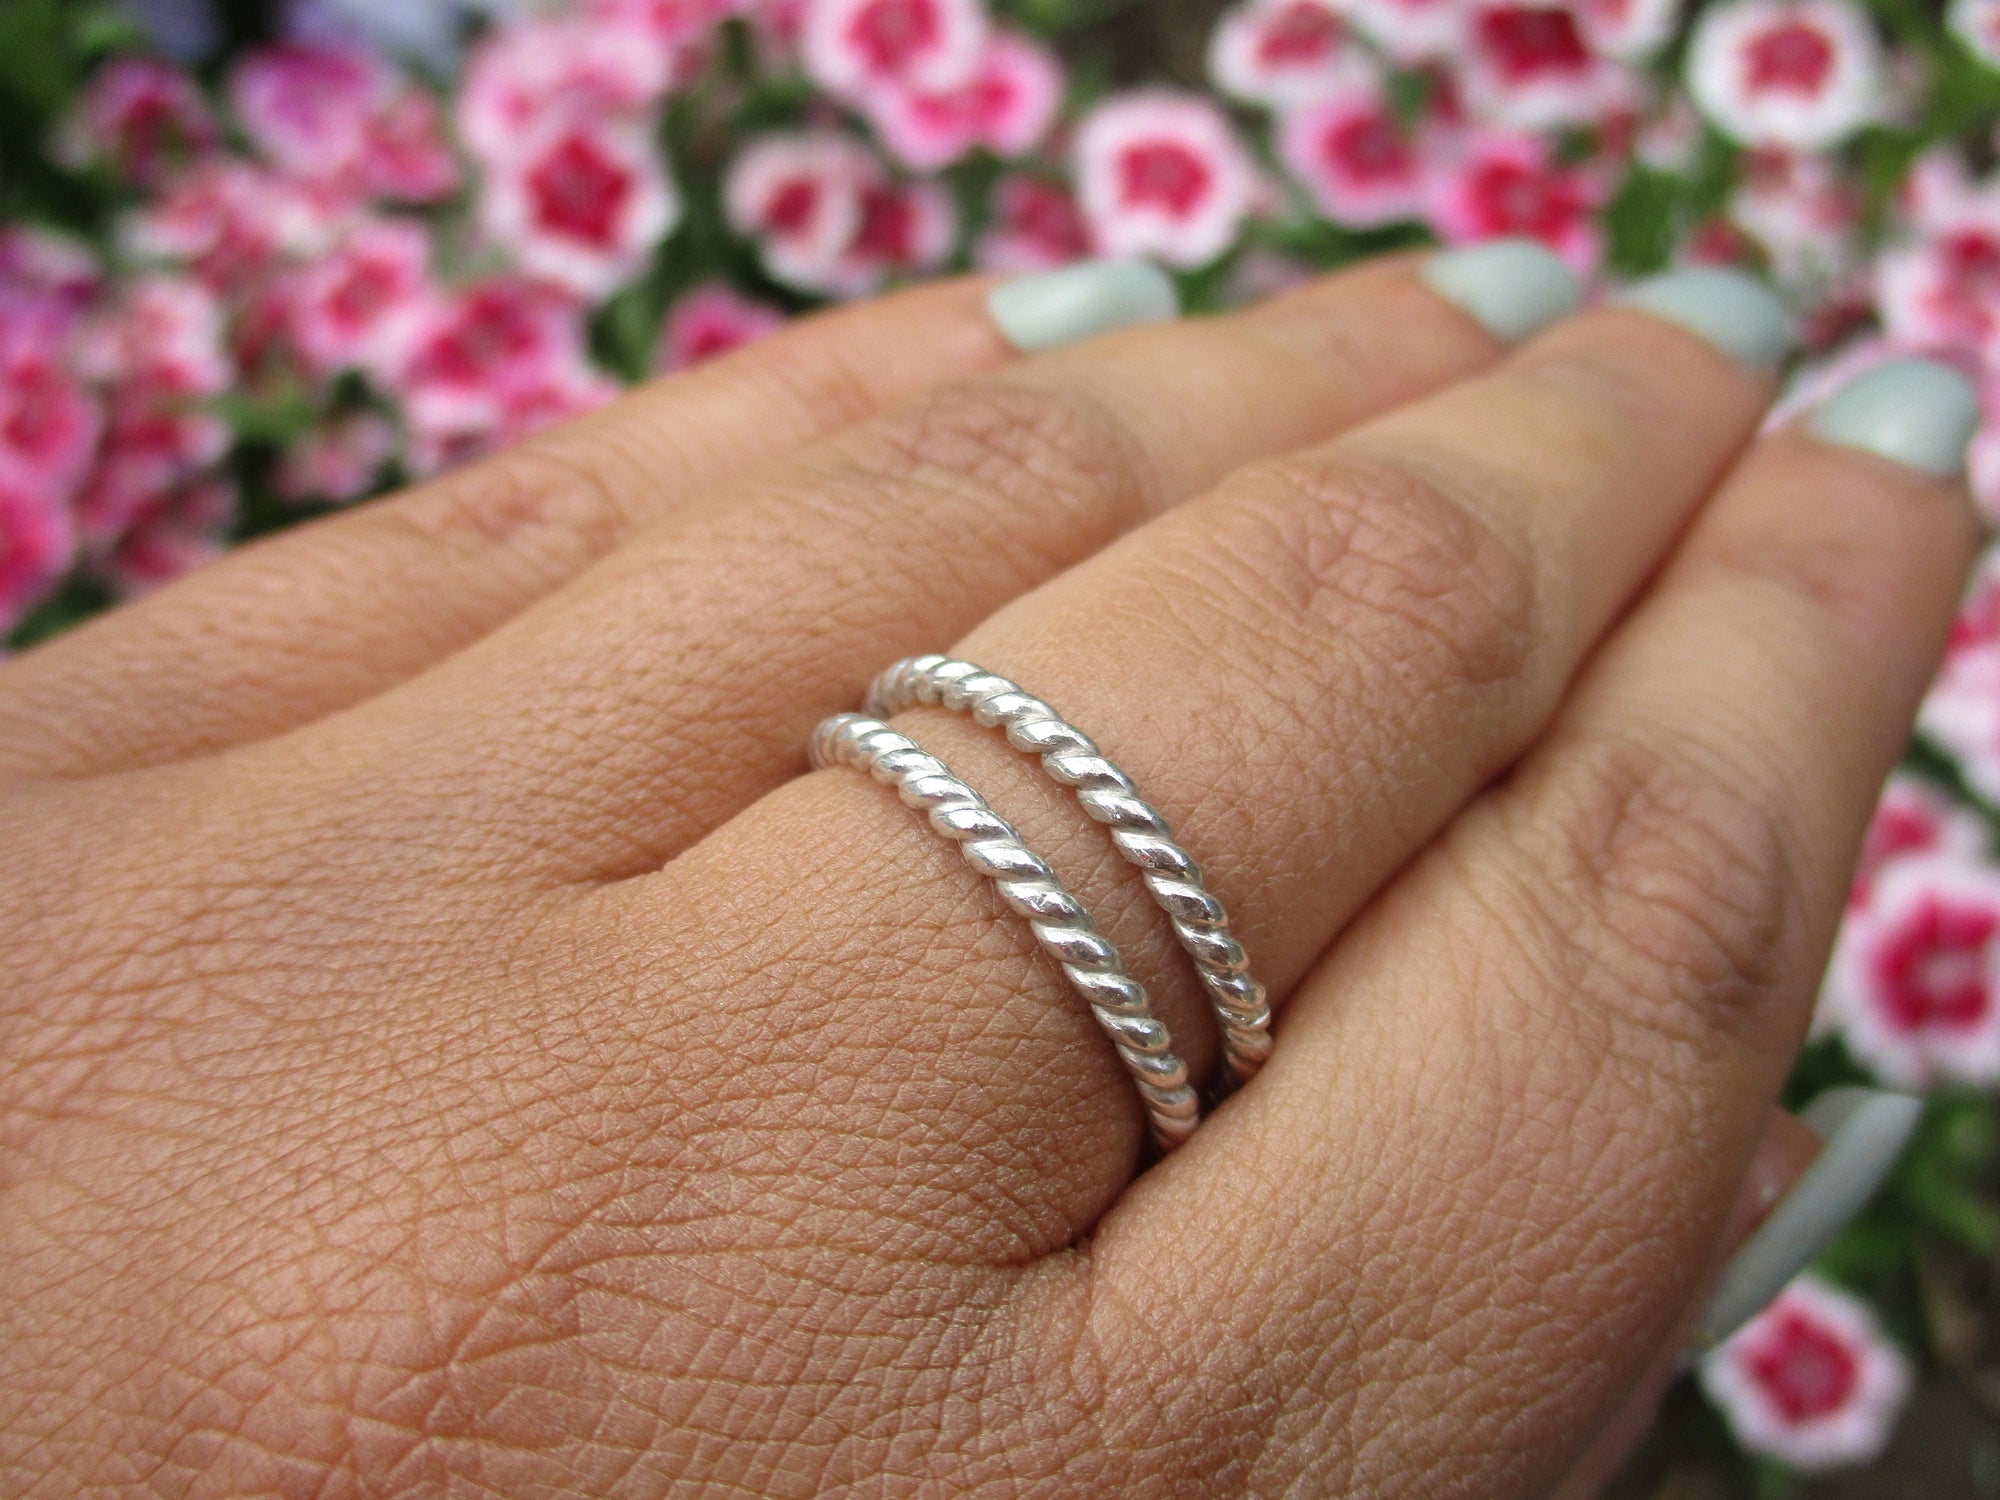 Twist Band Ring - Sterling Silver 